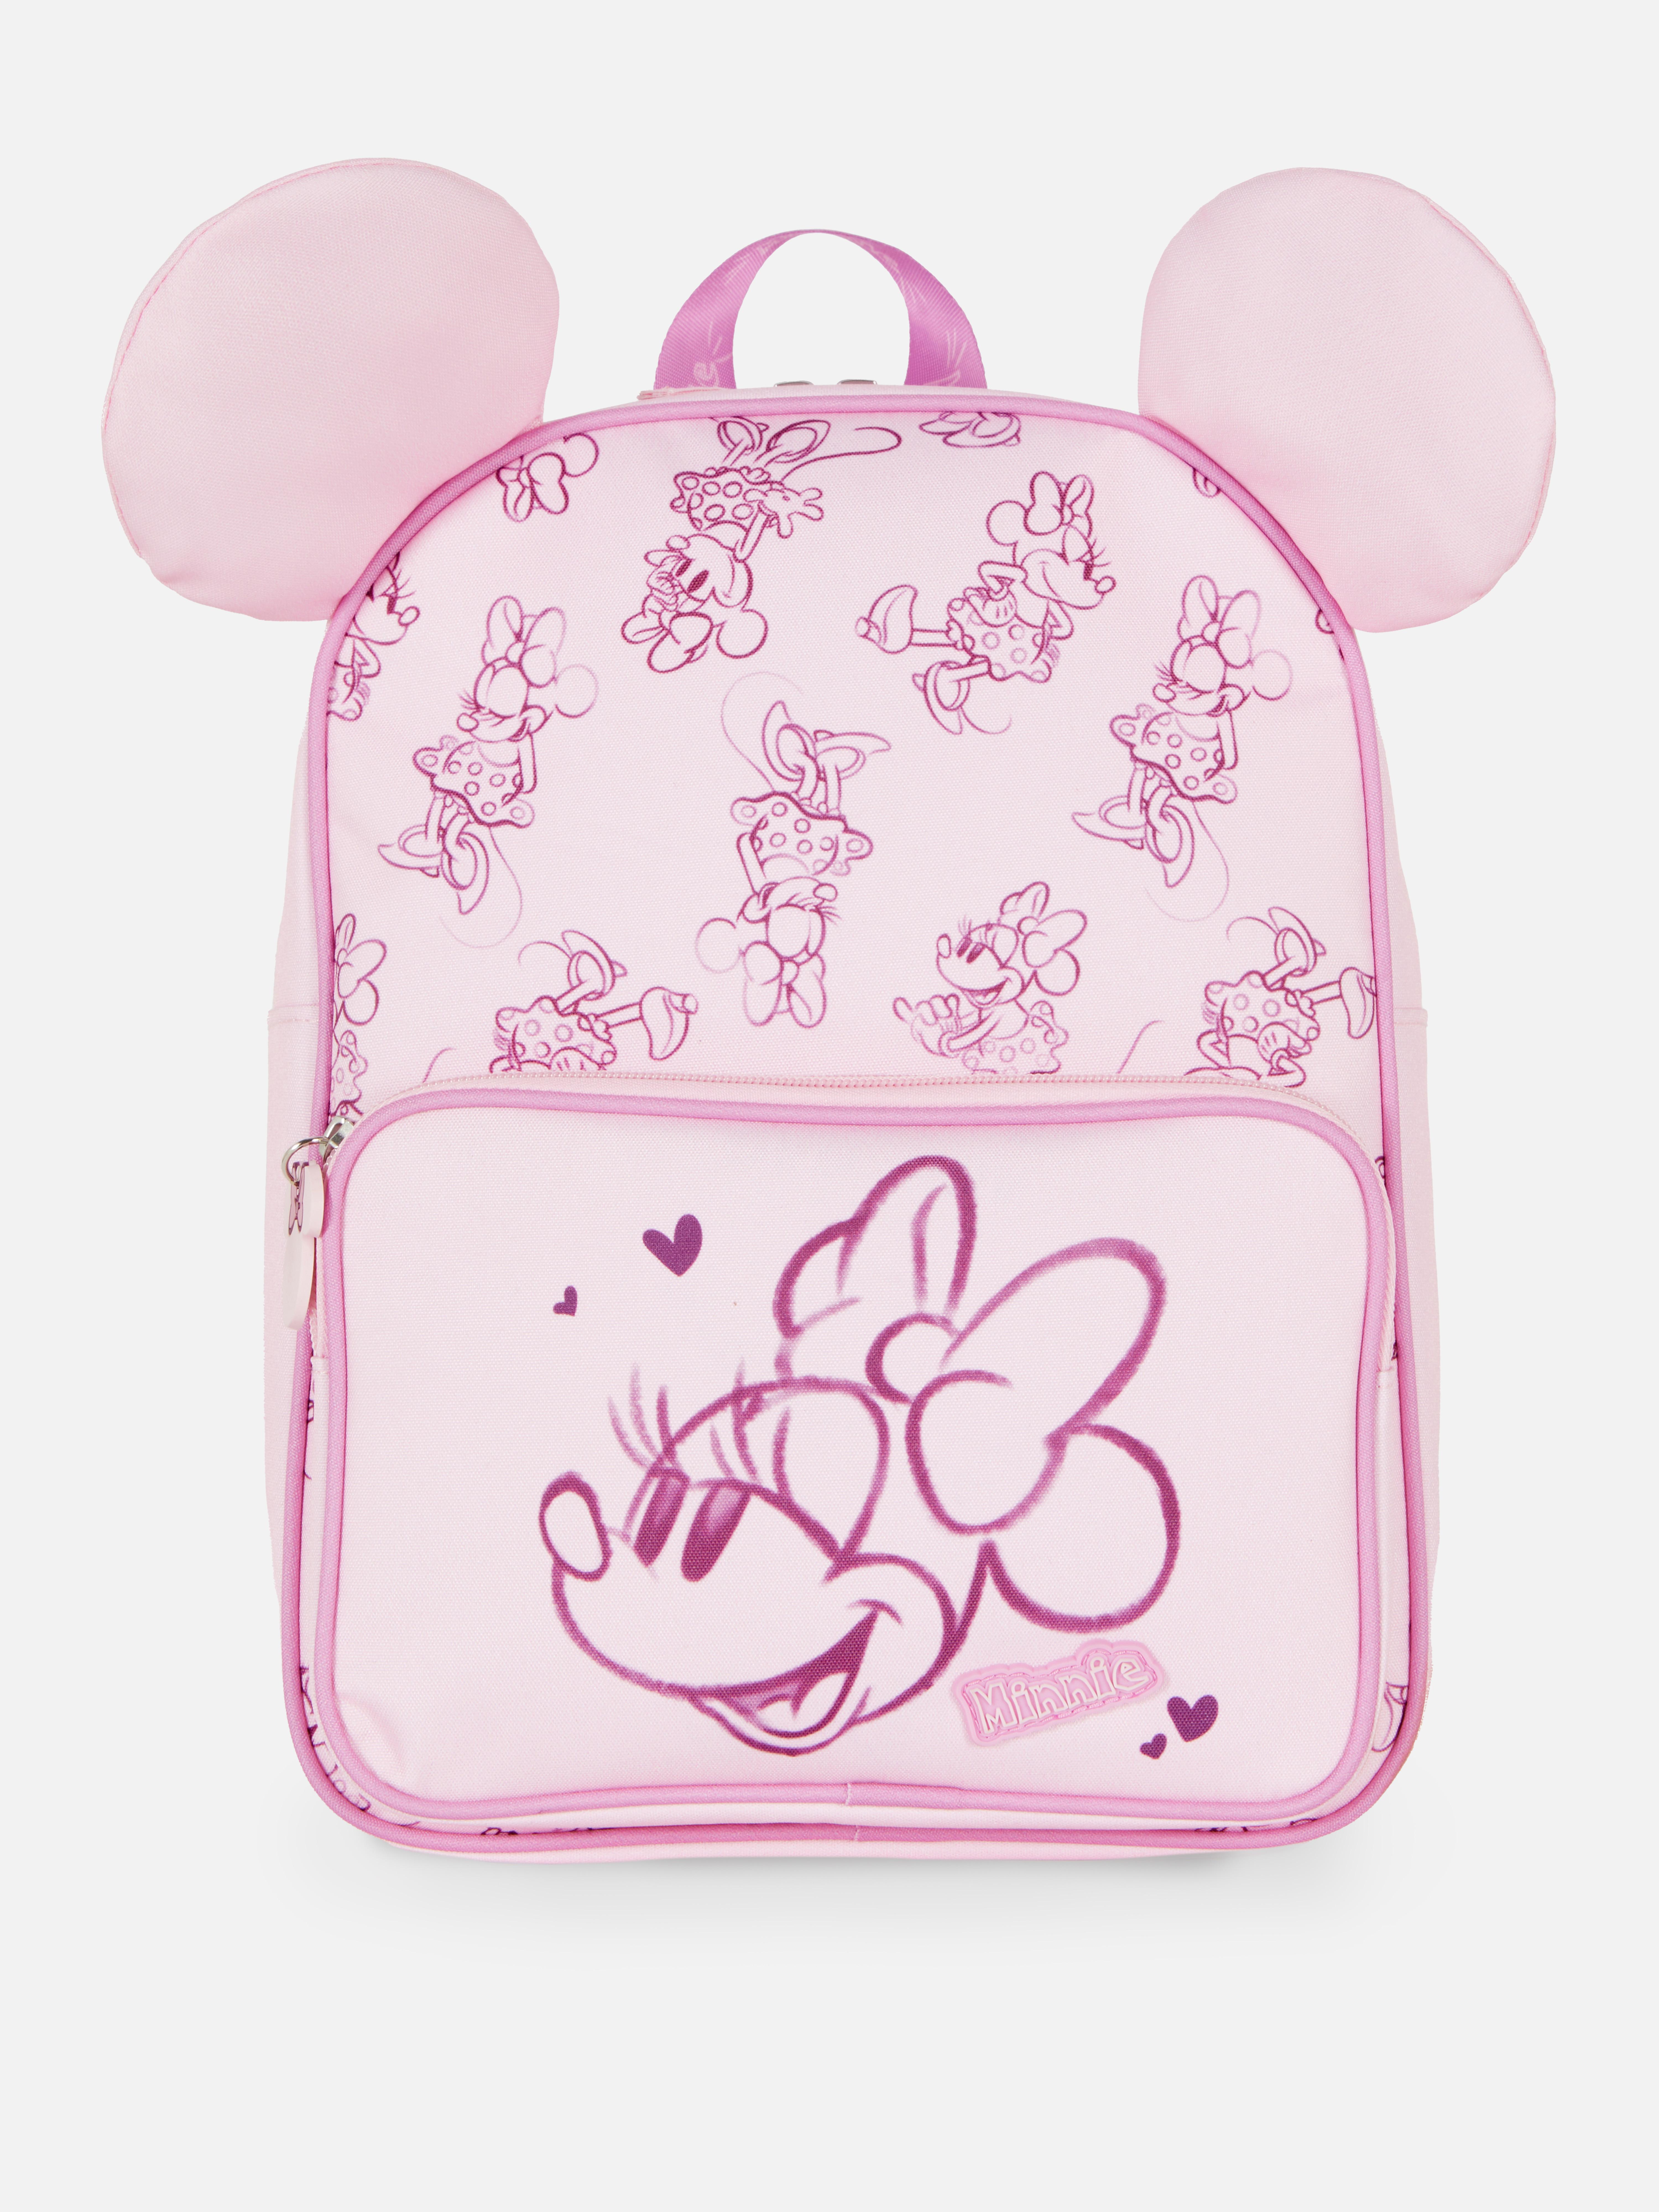 Disney’s Minnie Mouse Backpack